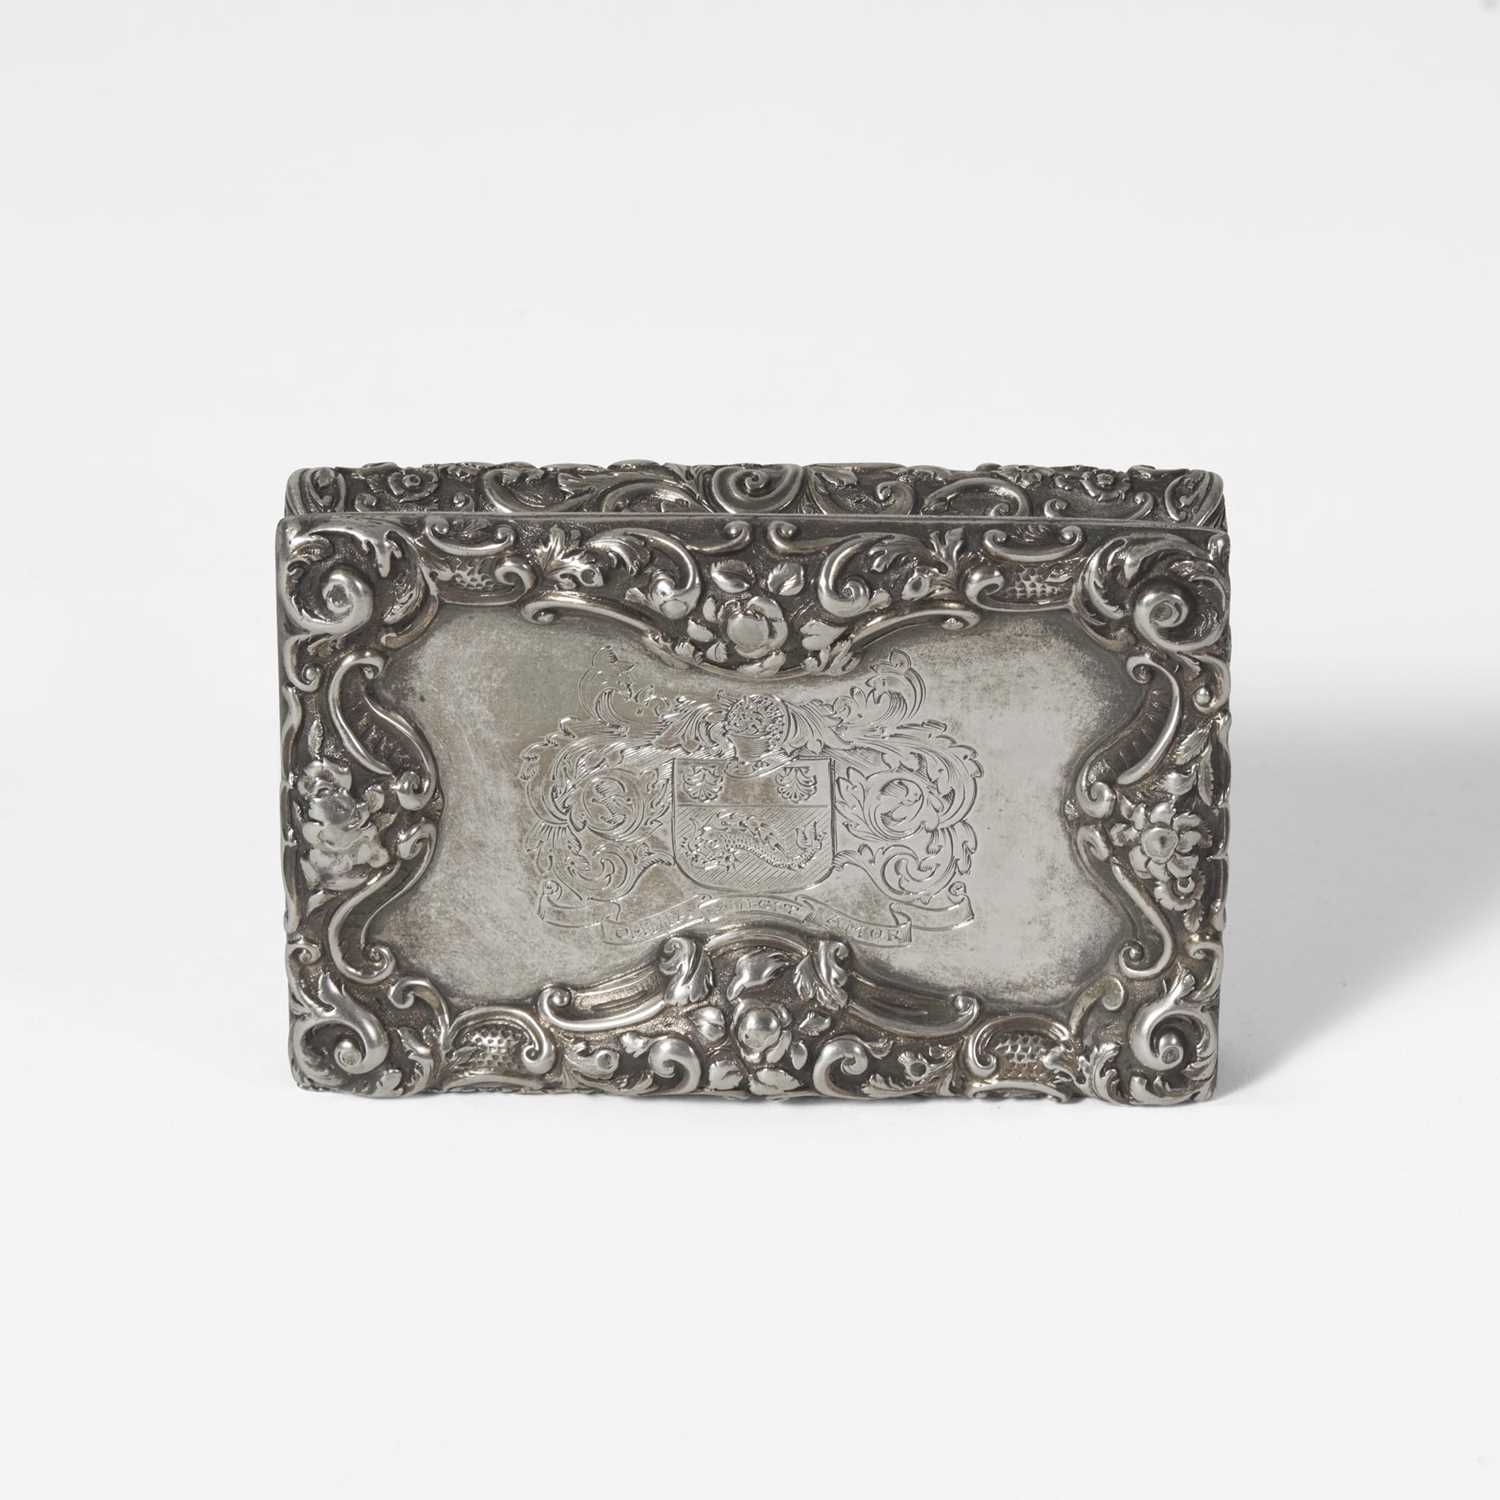 A group of five assorted sterling silver and silver-mounted boxes Various English and Continental - Image 7 of 7